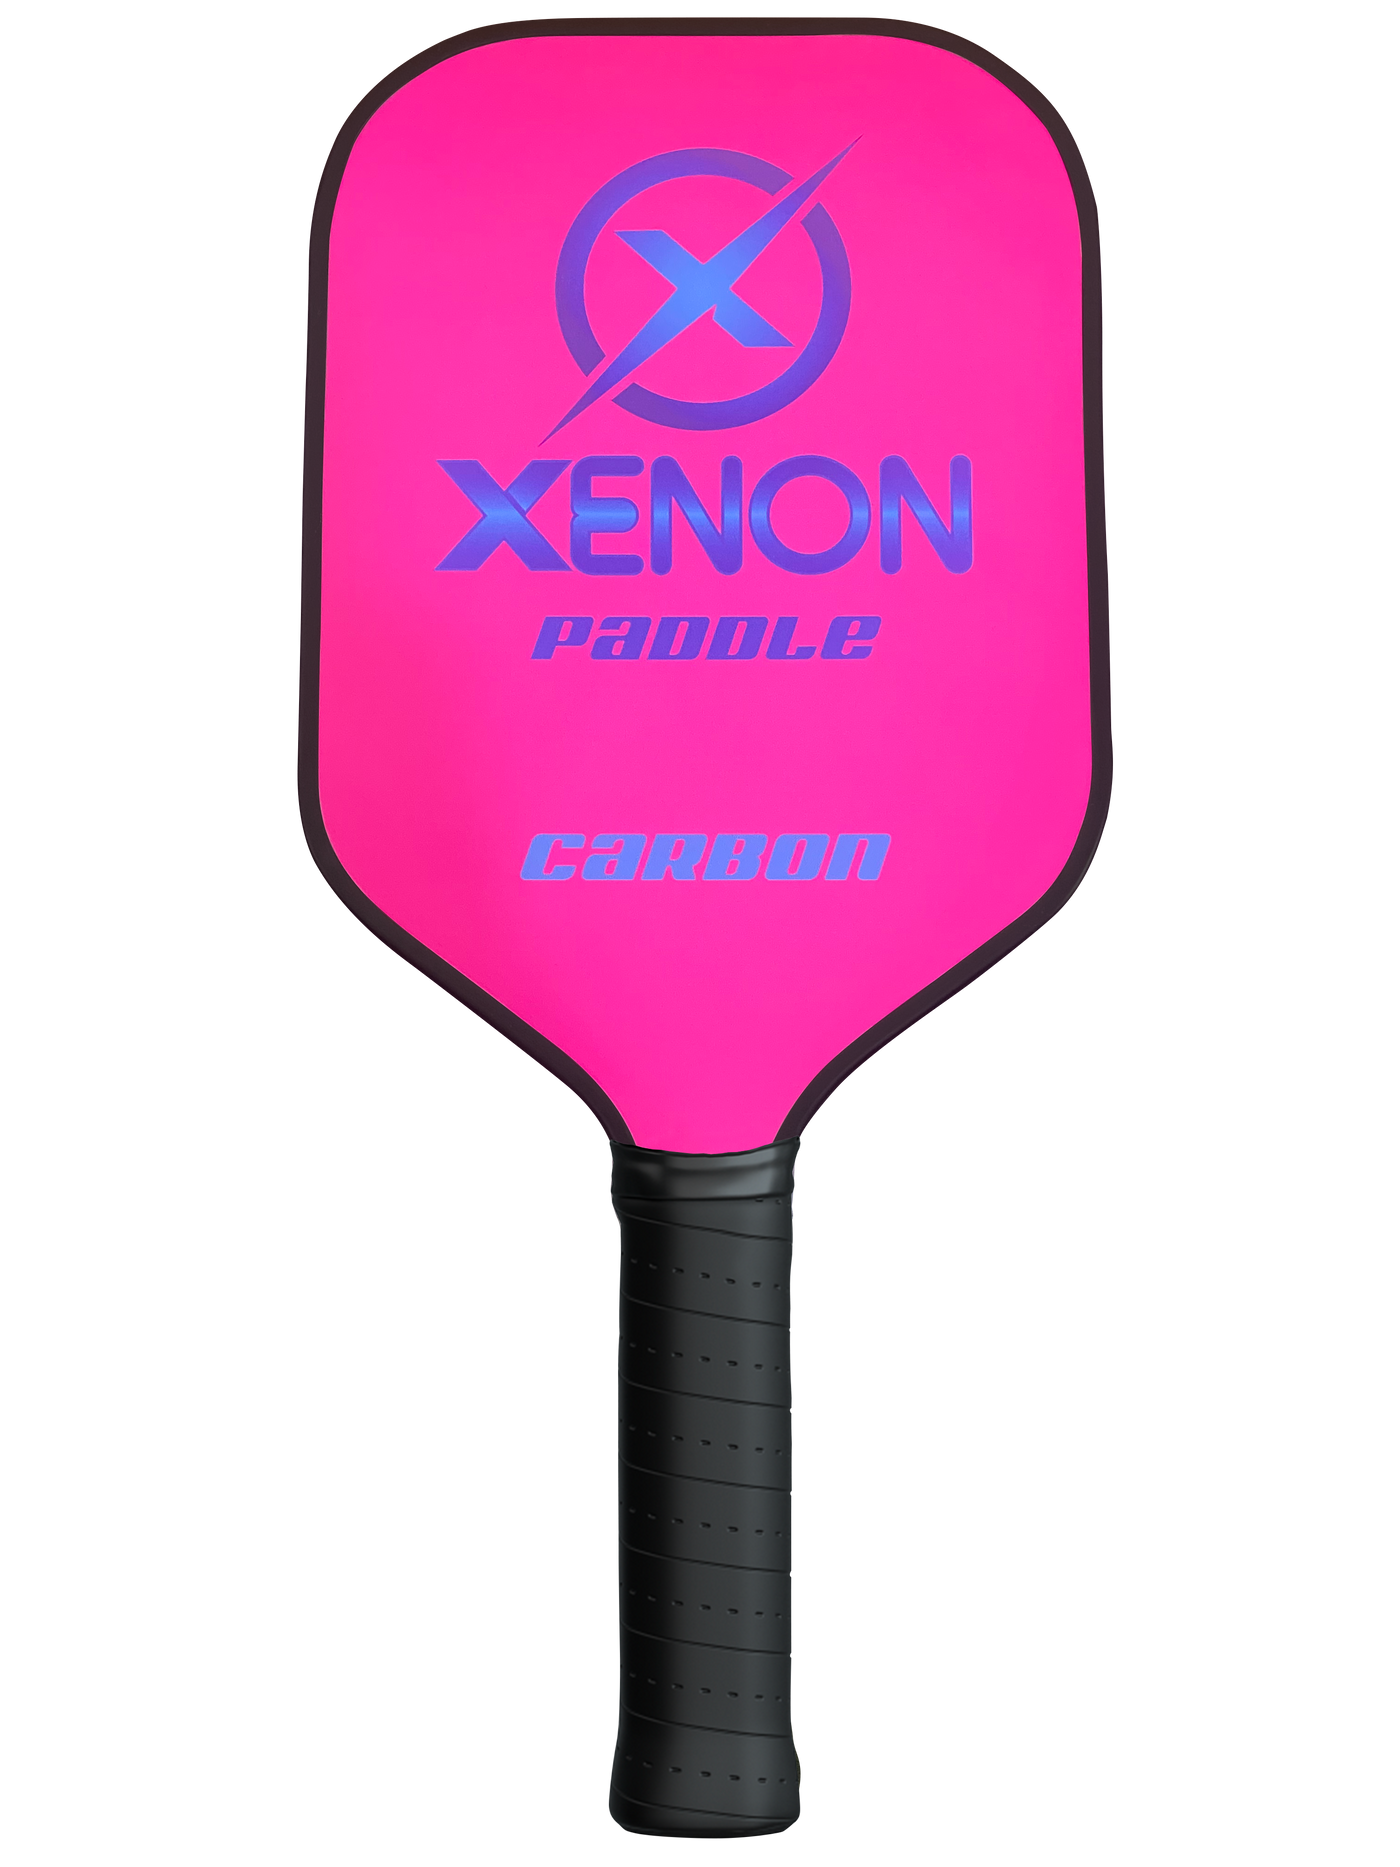 Xenon Paddle Carbon Pink Pickleball Paddle USAPA Approved for beginners or advanced players